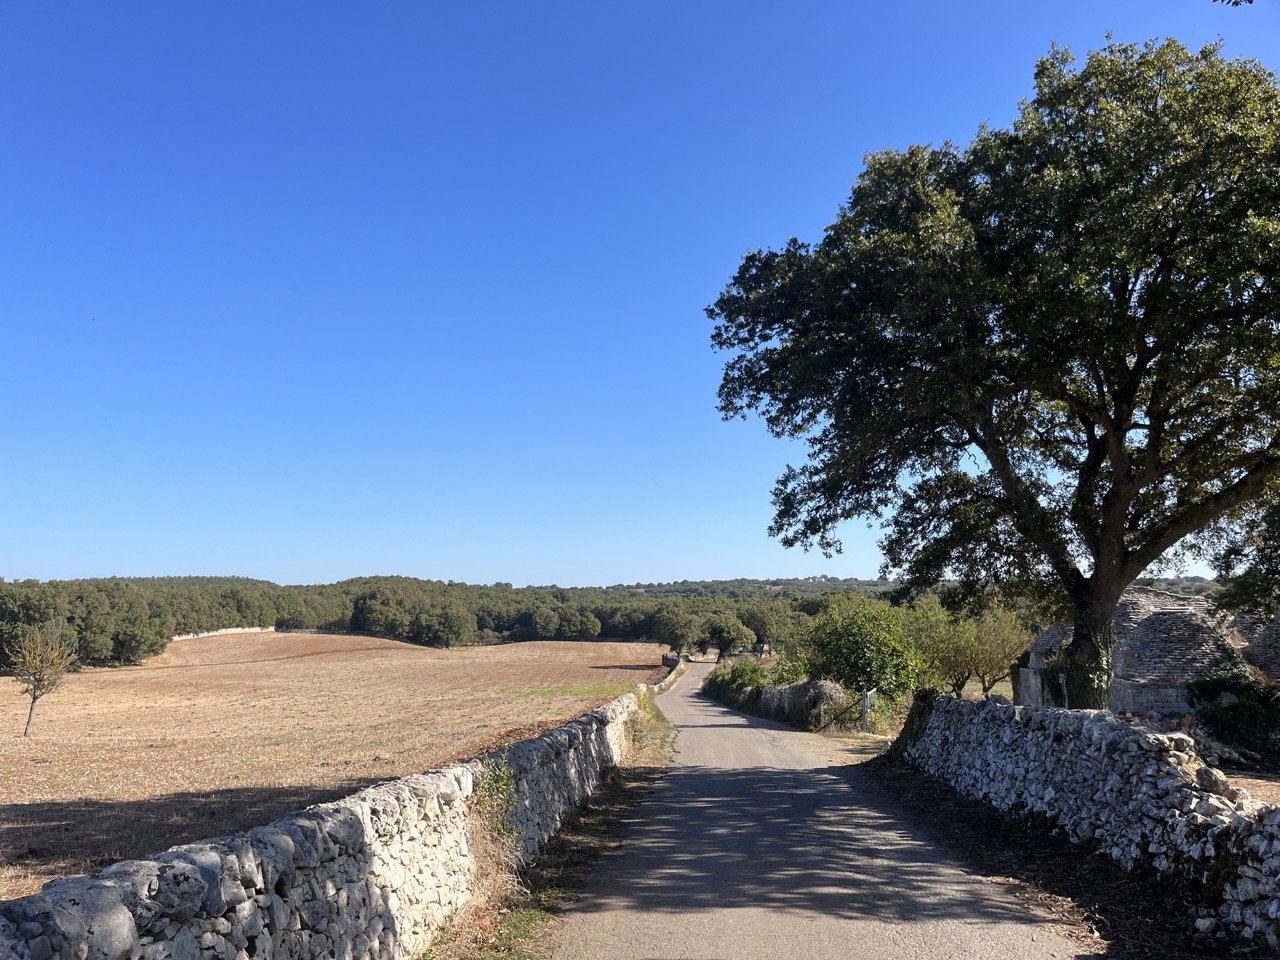 A bucolic country road in Puglia's Valle d'Itria surrounded by stone walls, open farmland, and dense forest.